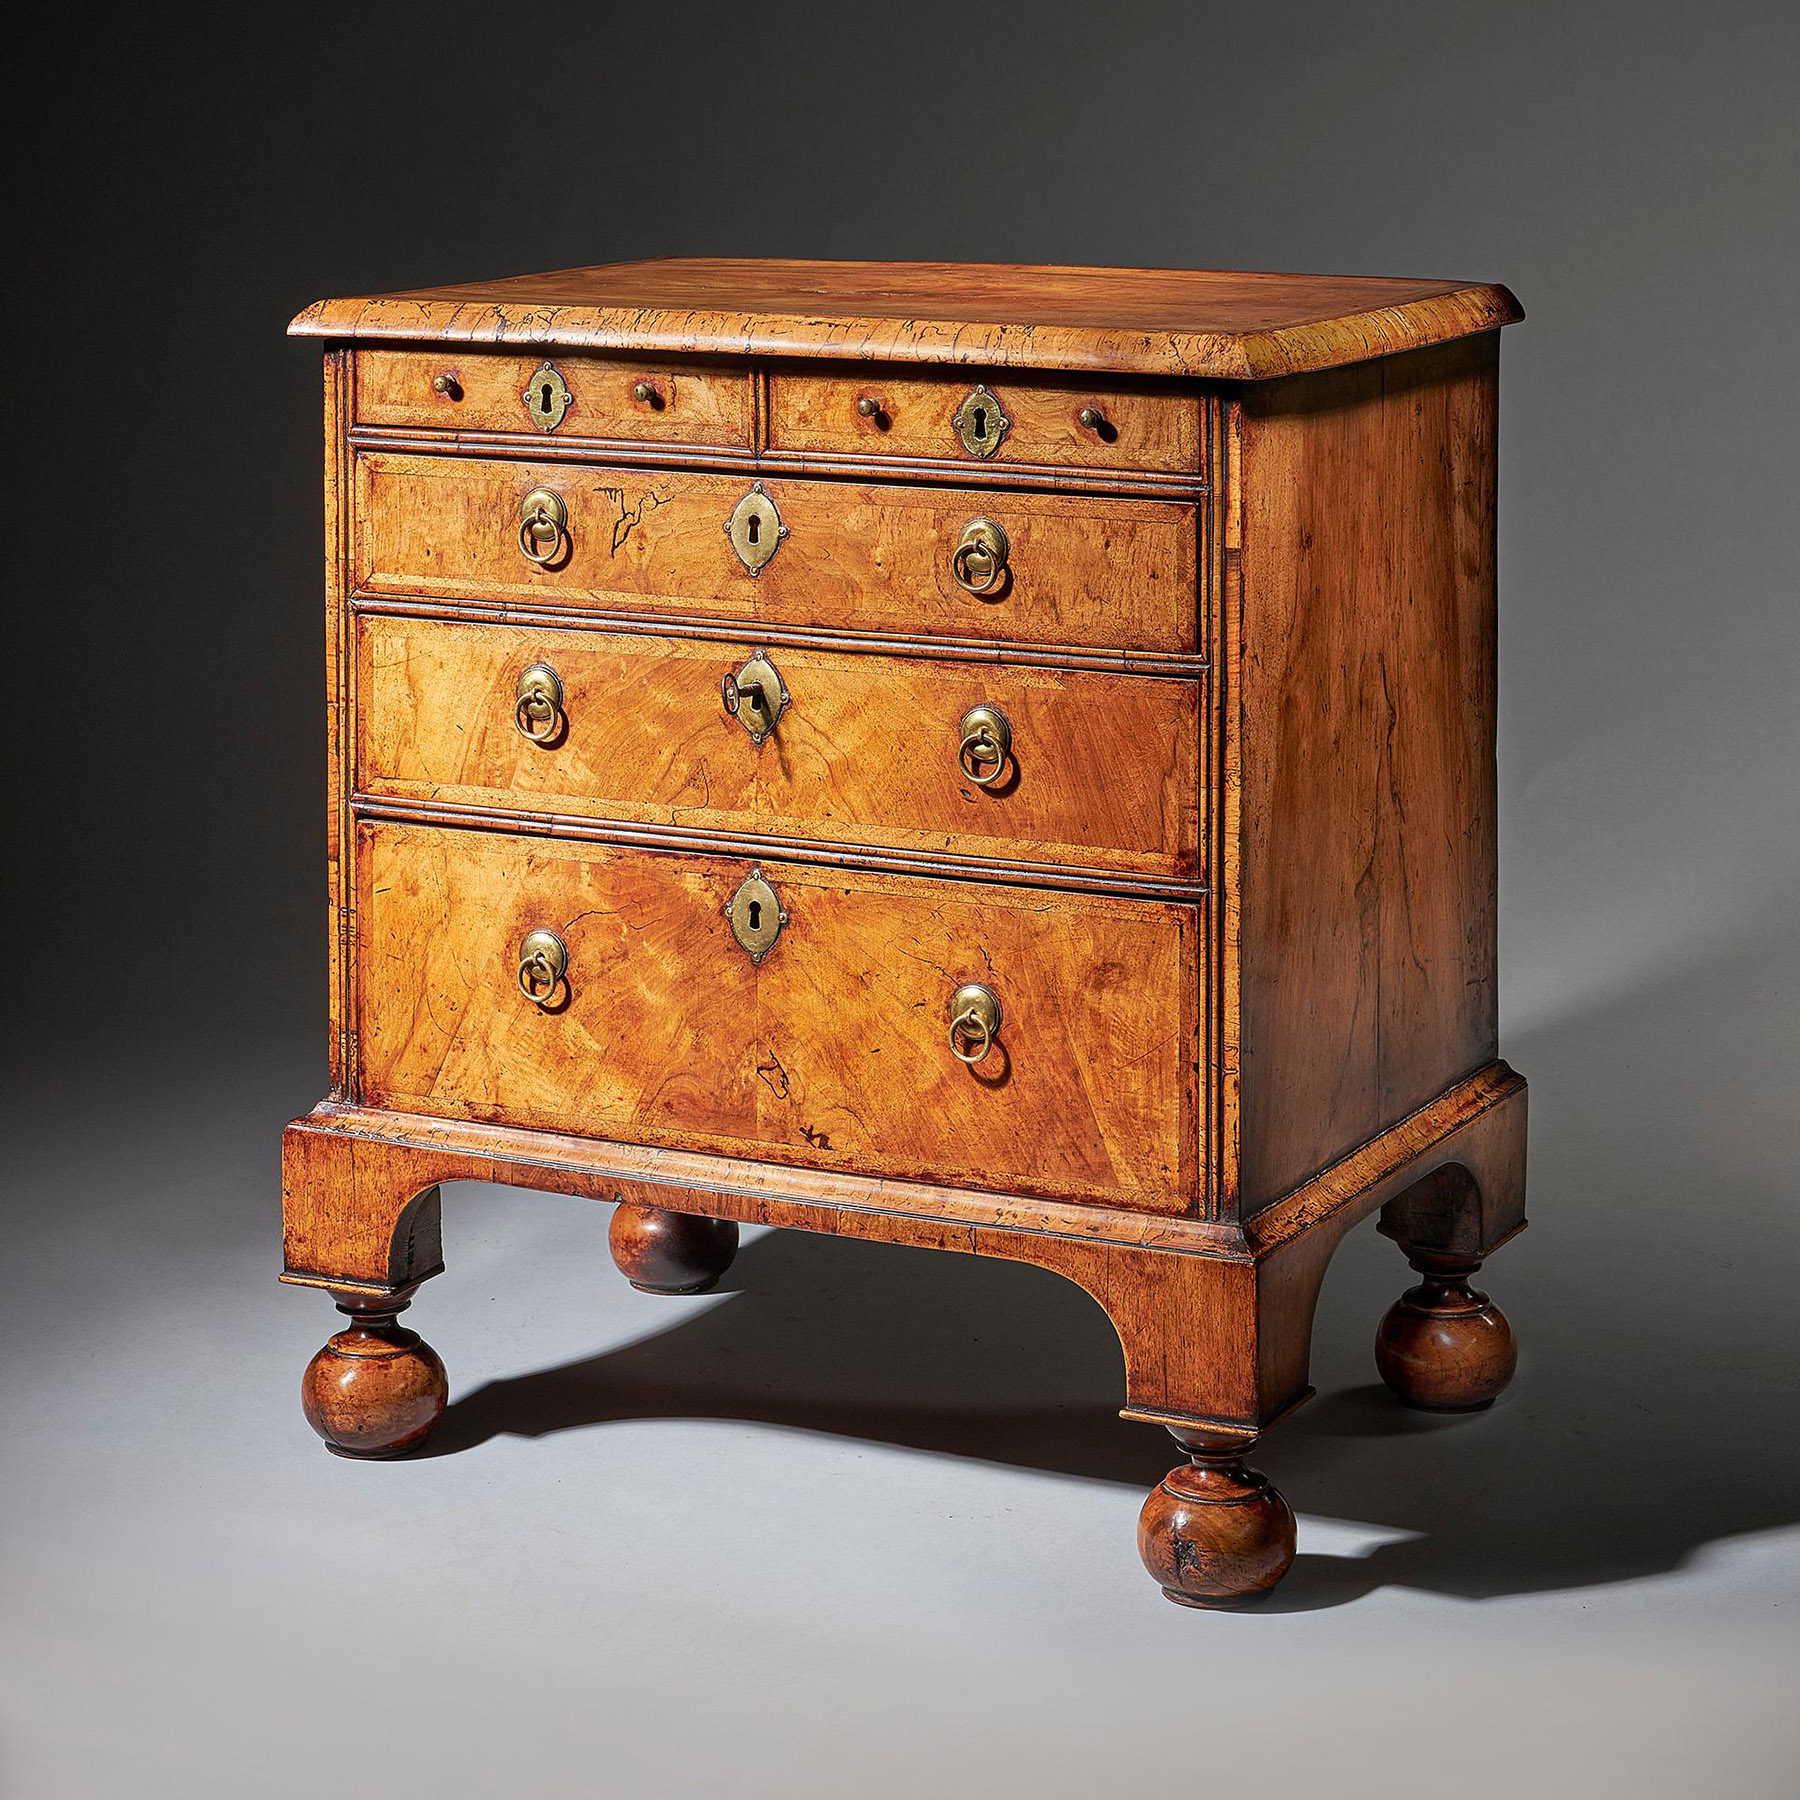 An extremely rare George I walnut chest of small proportions on ball and bracket 2